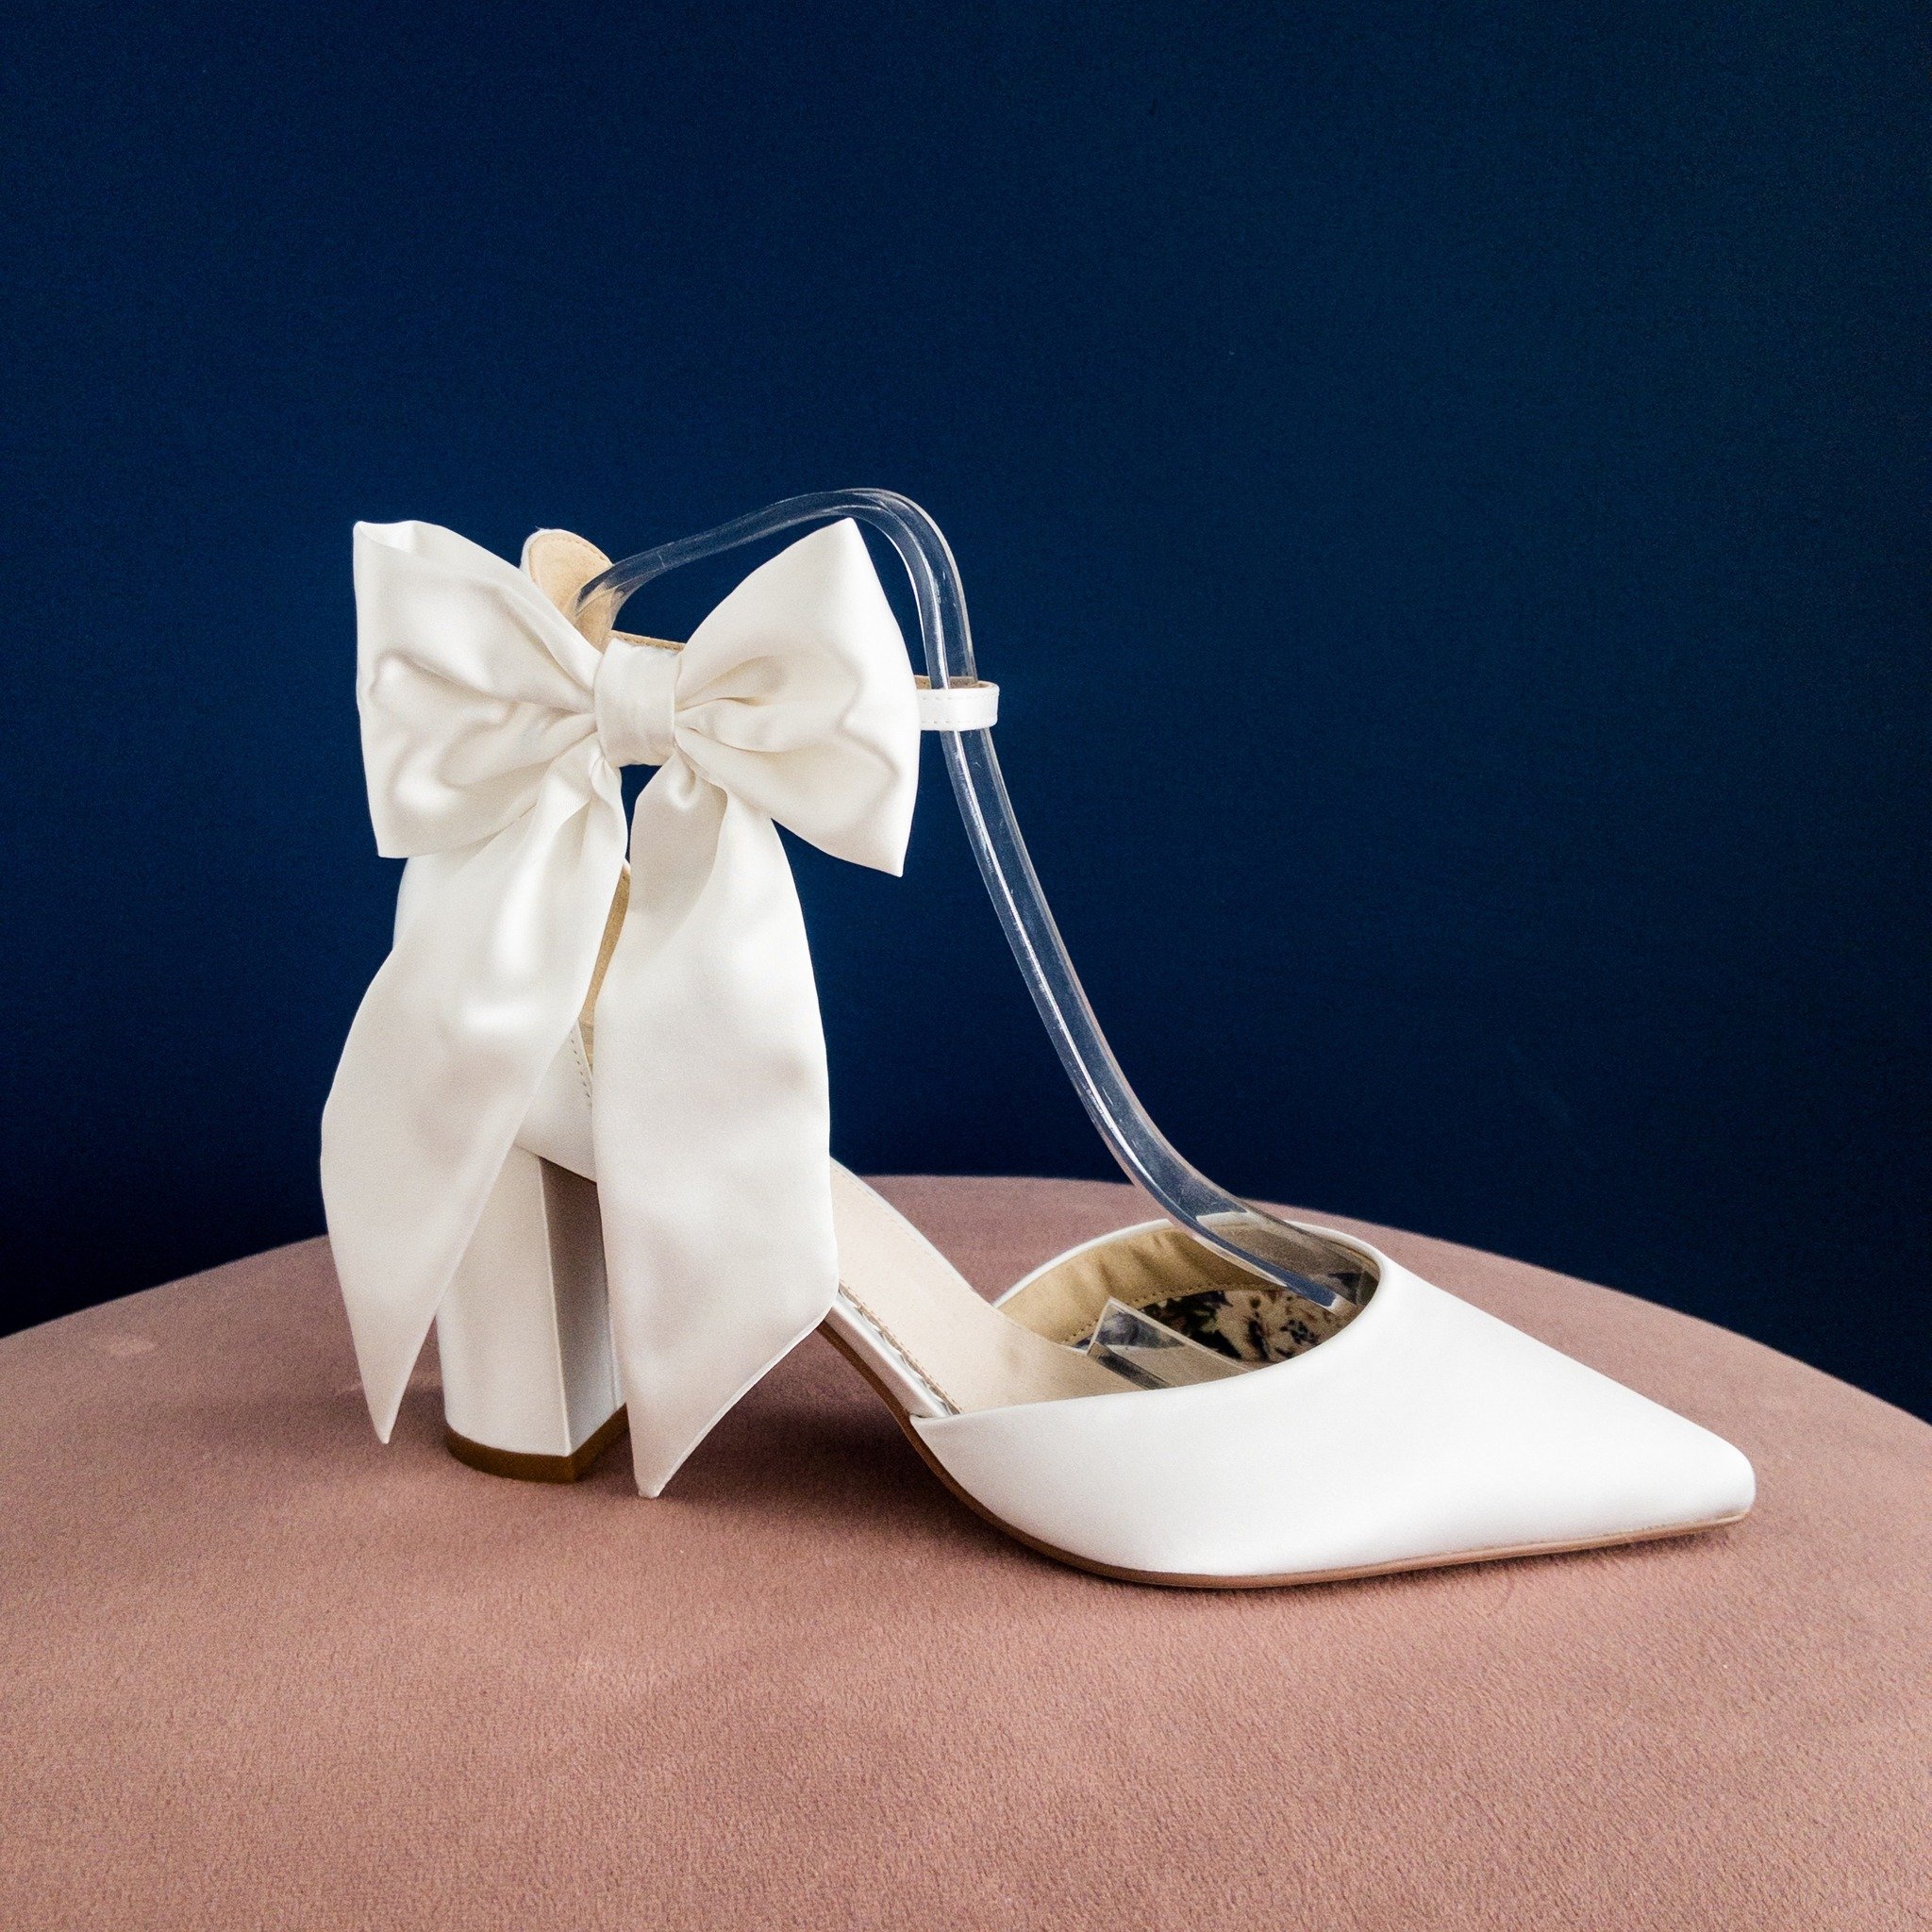 Introducing my latest obsession: the stunning Liberty bridal shoe! ✨💍✨

With a detachable River satin bow, it&rsquo;s the ultimate in chic sophistication and the perfect complement to your wedding gown. 

Ready to find your Perfect Bridal shoes with